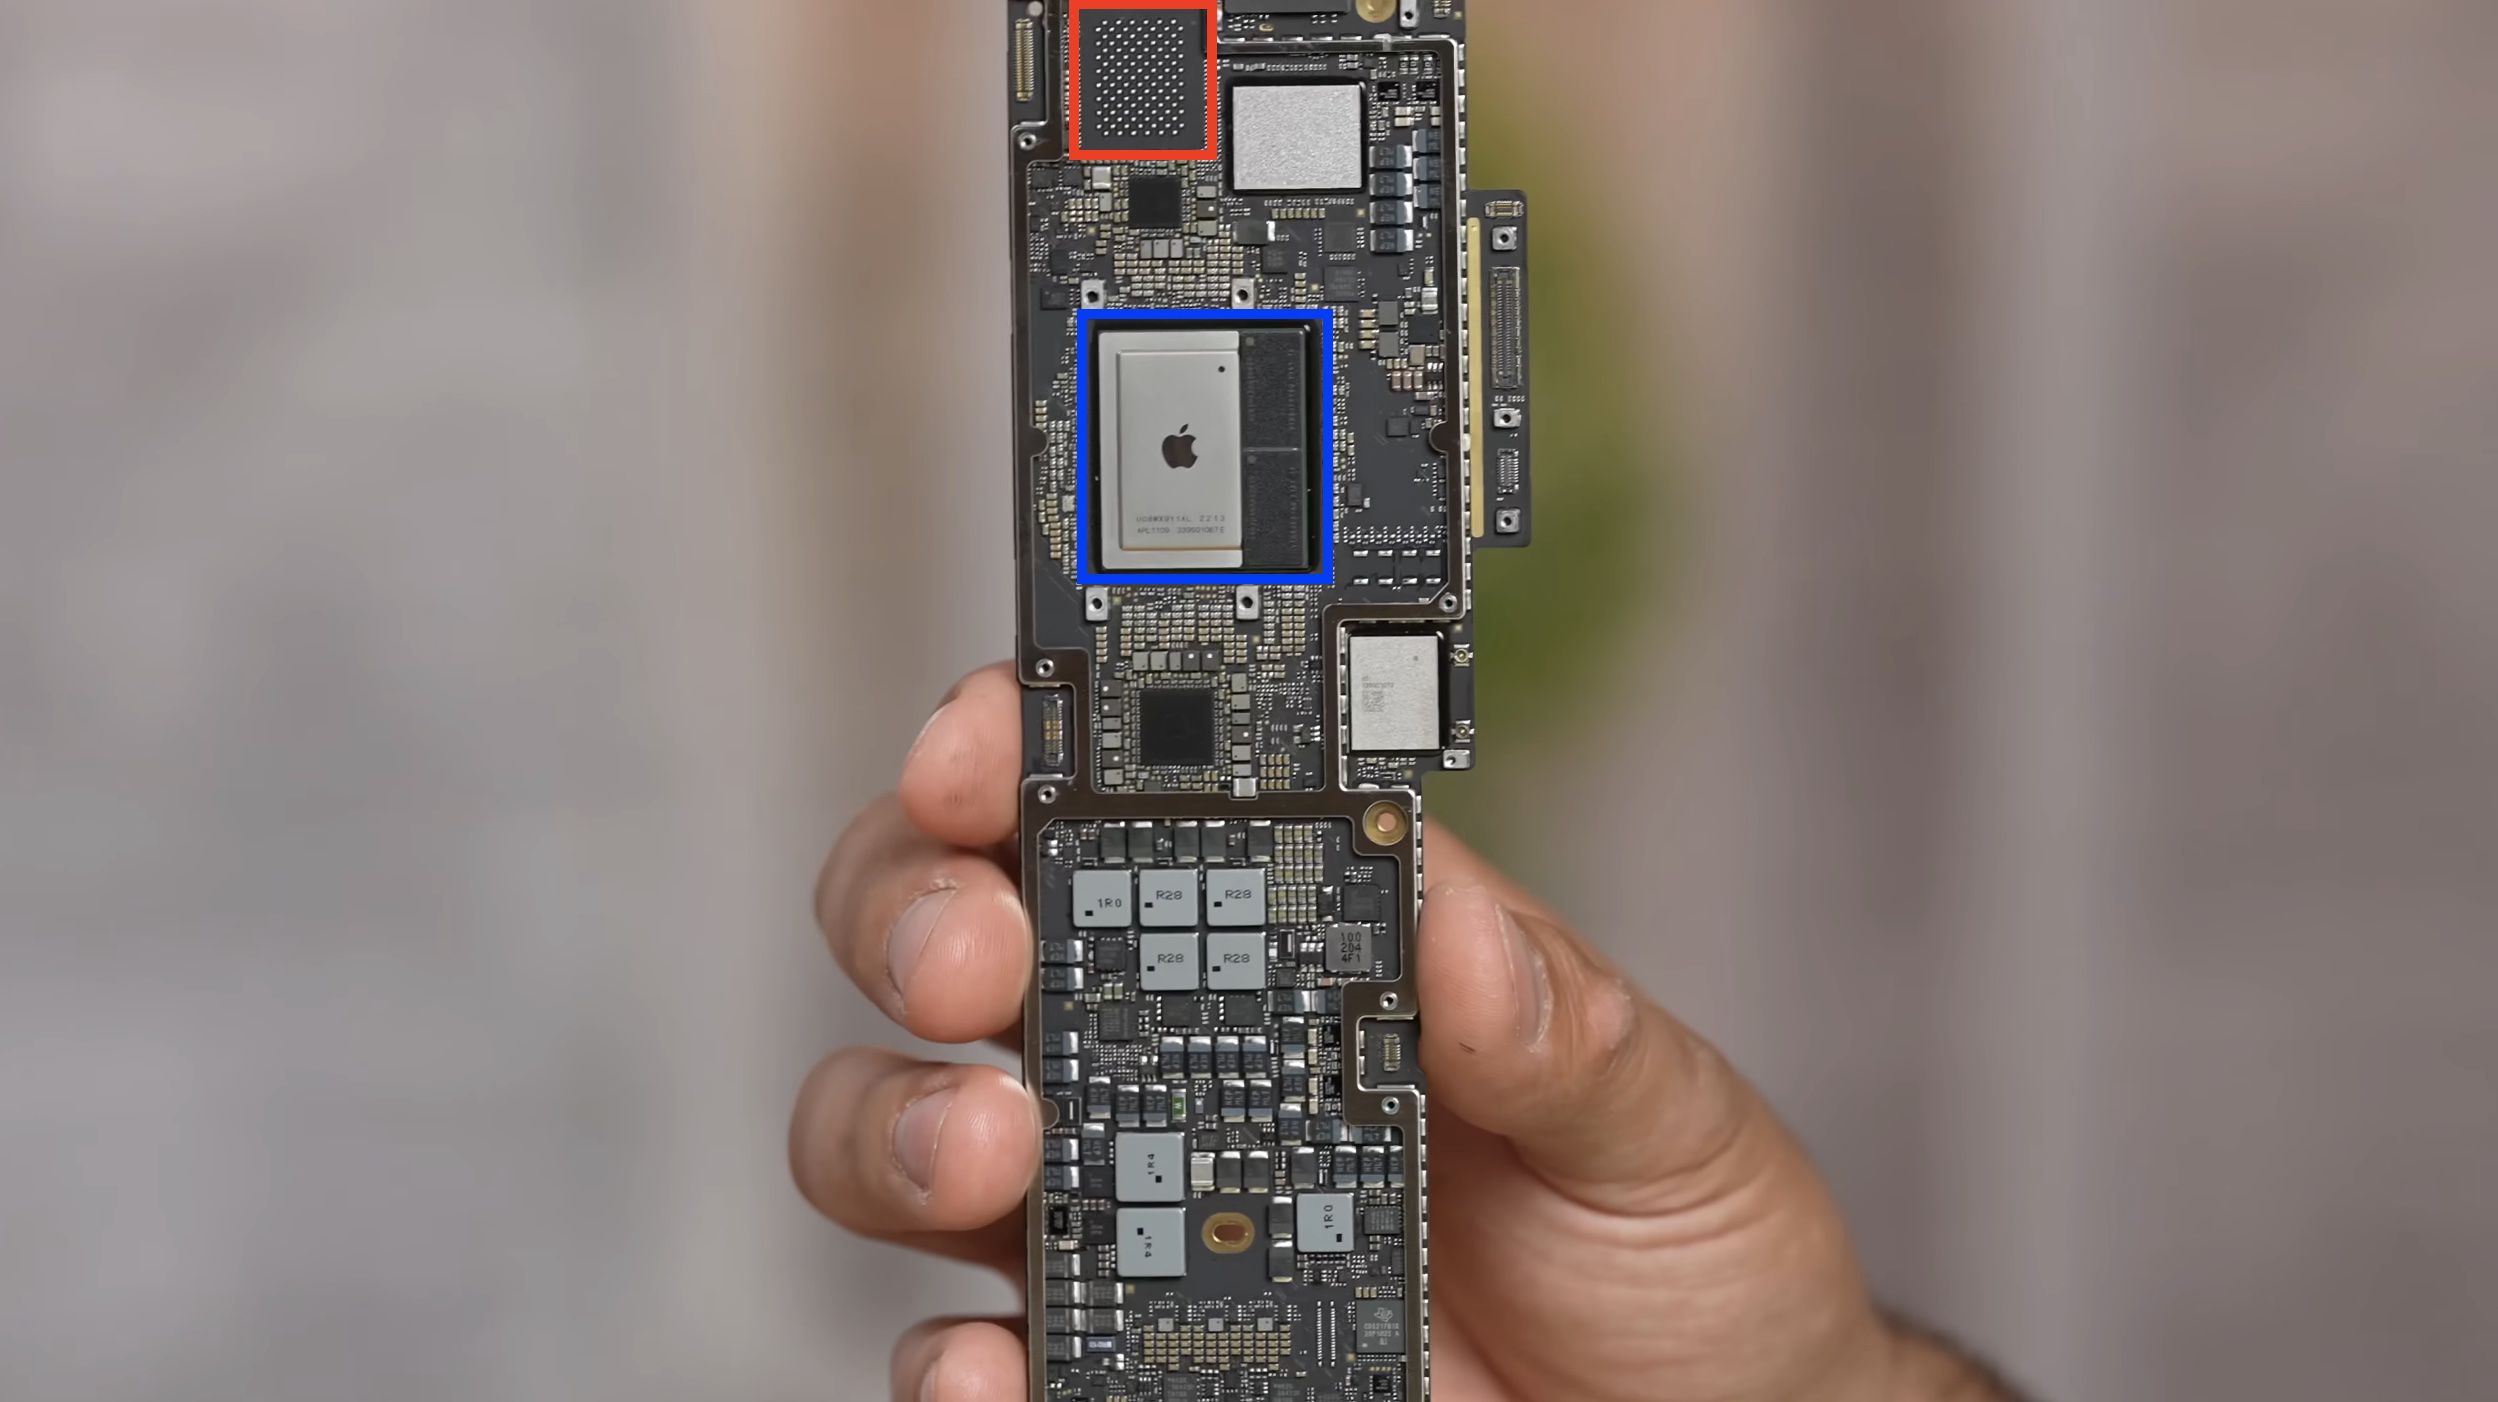 macbook-air-teardown-reveals-m2-chip-and-single-storage-chip-for-256gb-model